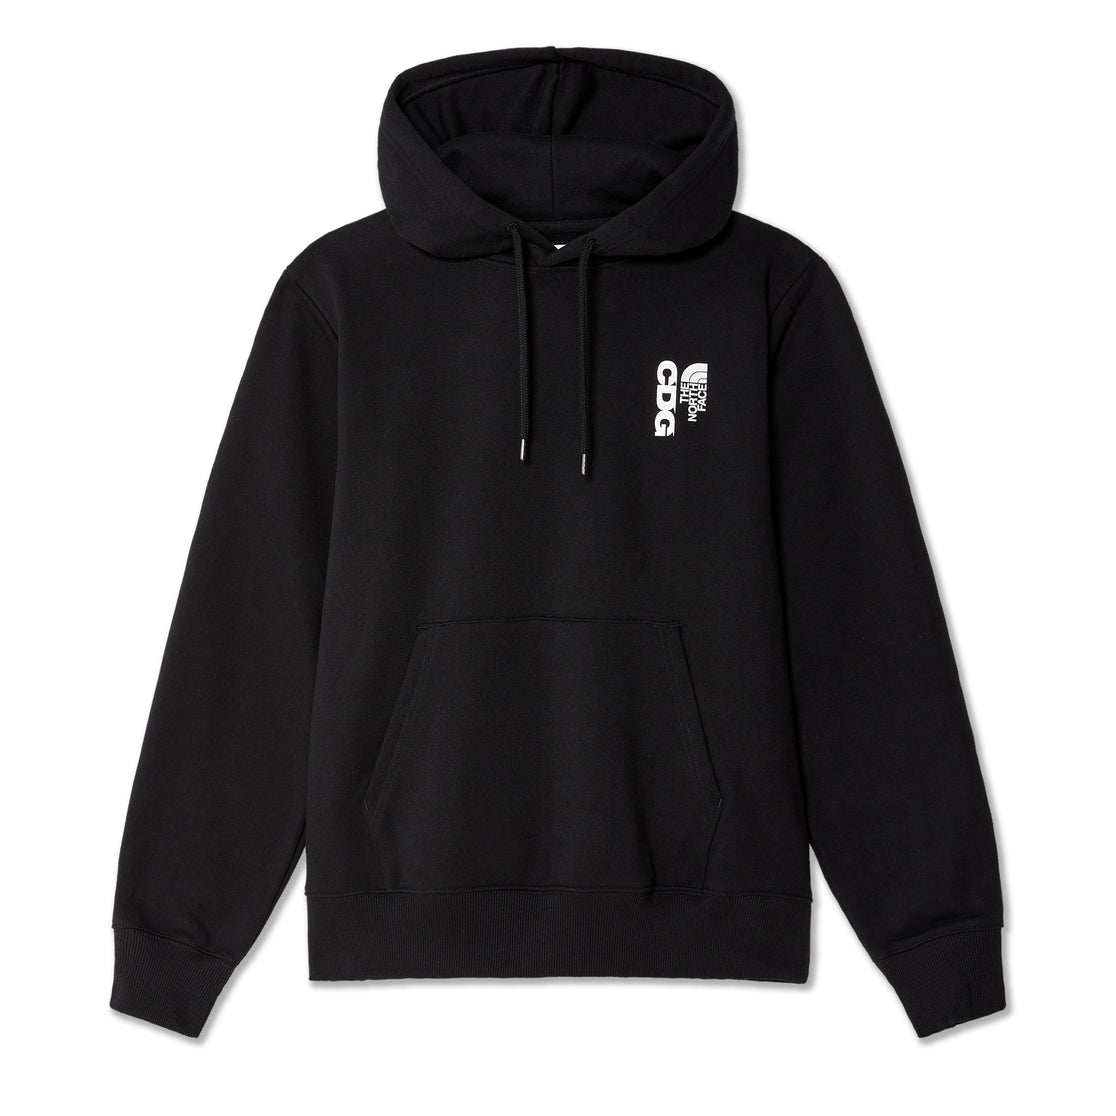 The North Face CDG Icon Hoodie Lサイズ